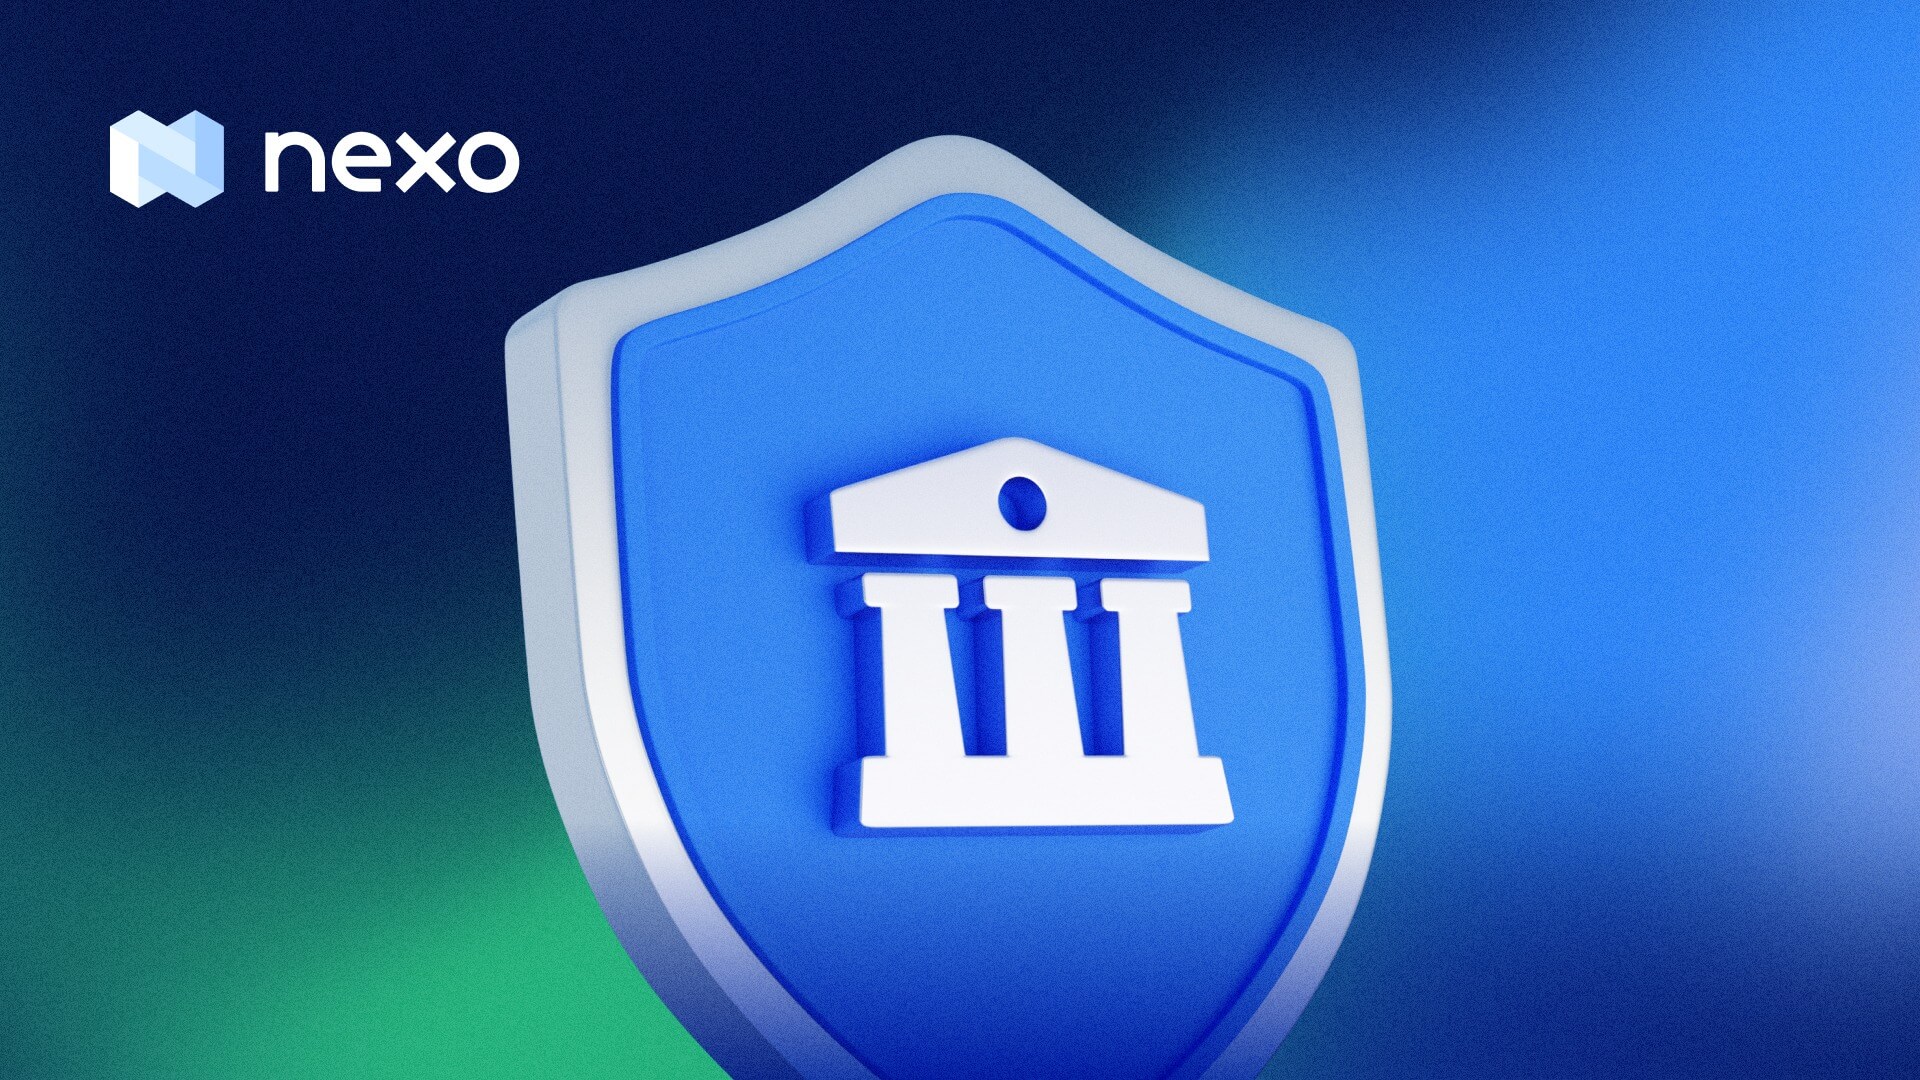 Nexo’s Guiding Principles for Always Keeping Your Assets Safe